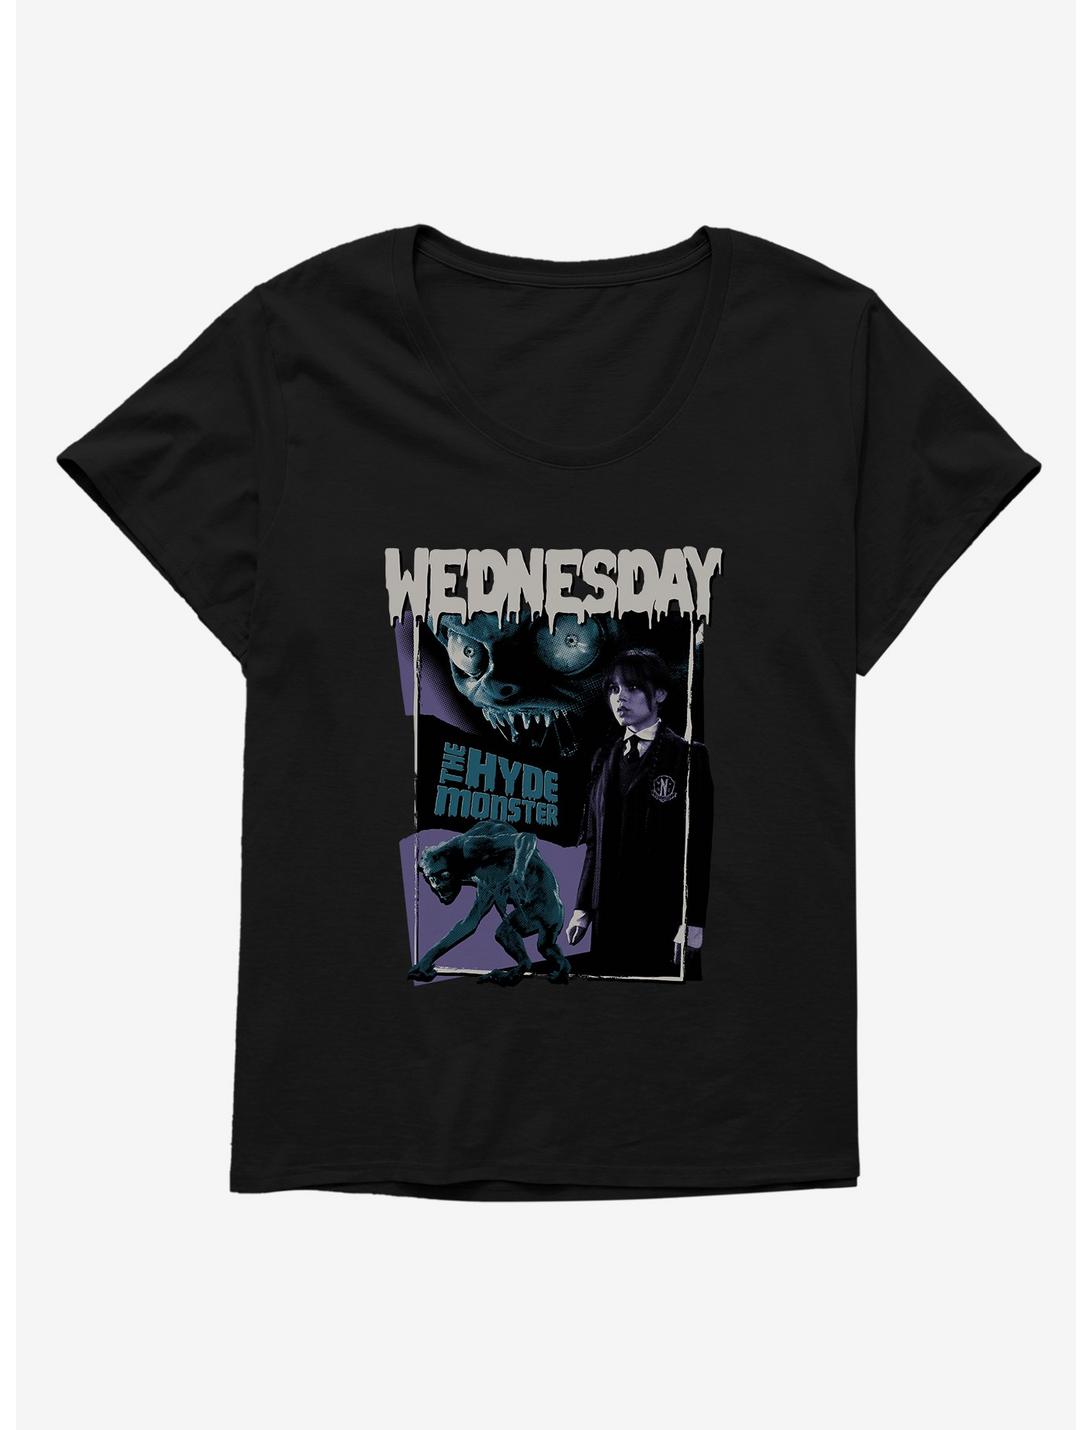 Wednesday The Hyde Womens T-Shirt Plus Size, BLACK, hi-res